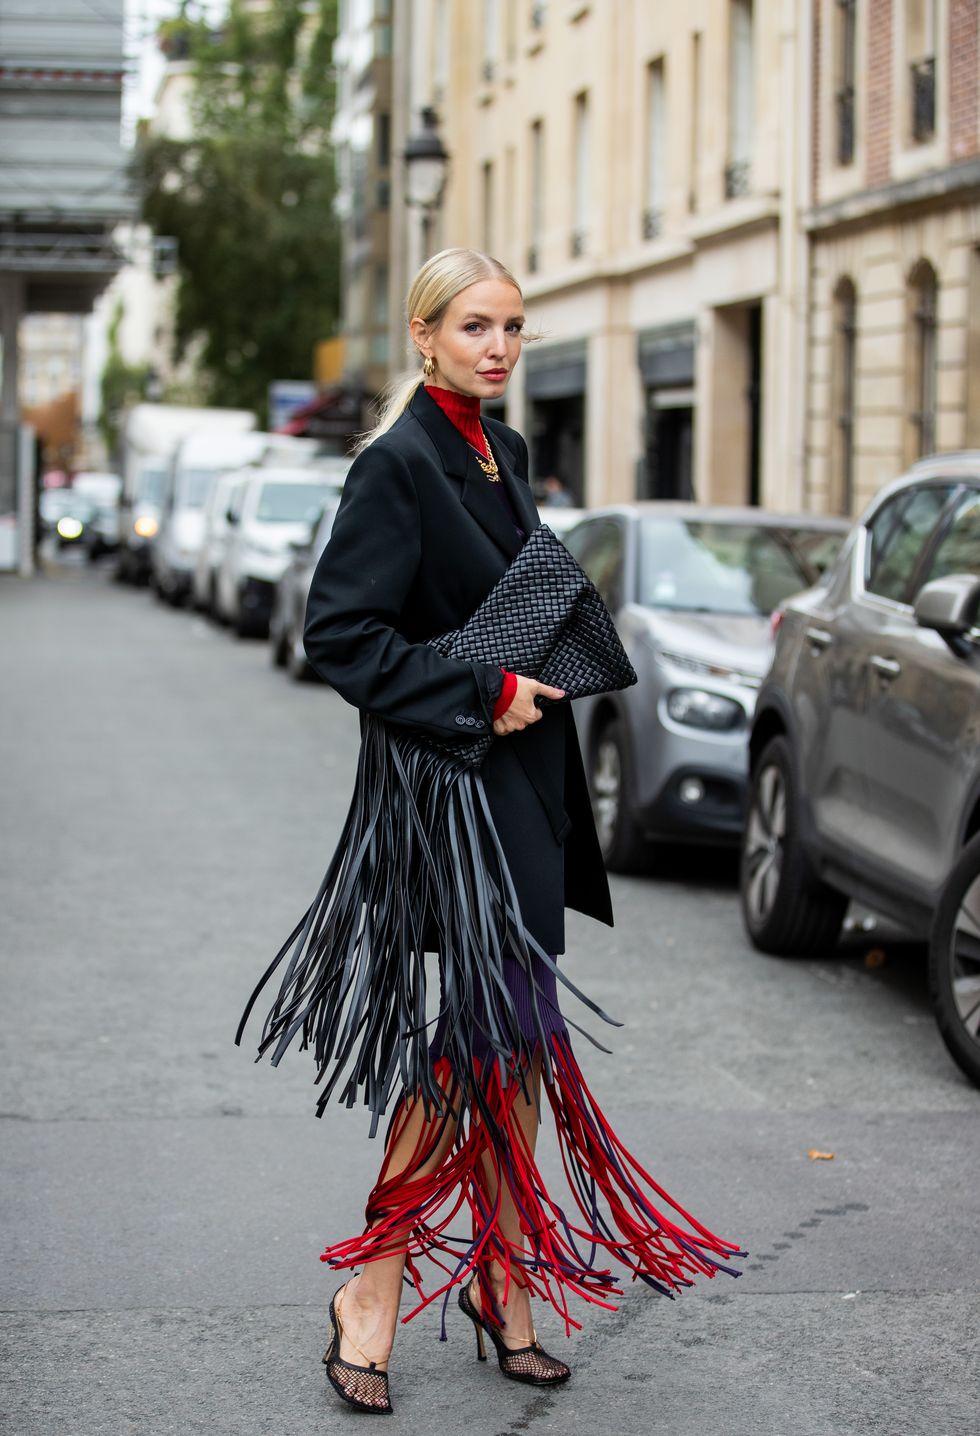 paris, france   october 08 leonie hanne is seen wearing black maison margiela blazer, purple red dress with fringes bottega veneta and bag with fringes, heels during a street style fashion photo session on october 08, 2020 in paris, france photo by christian vieriggetty images